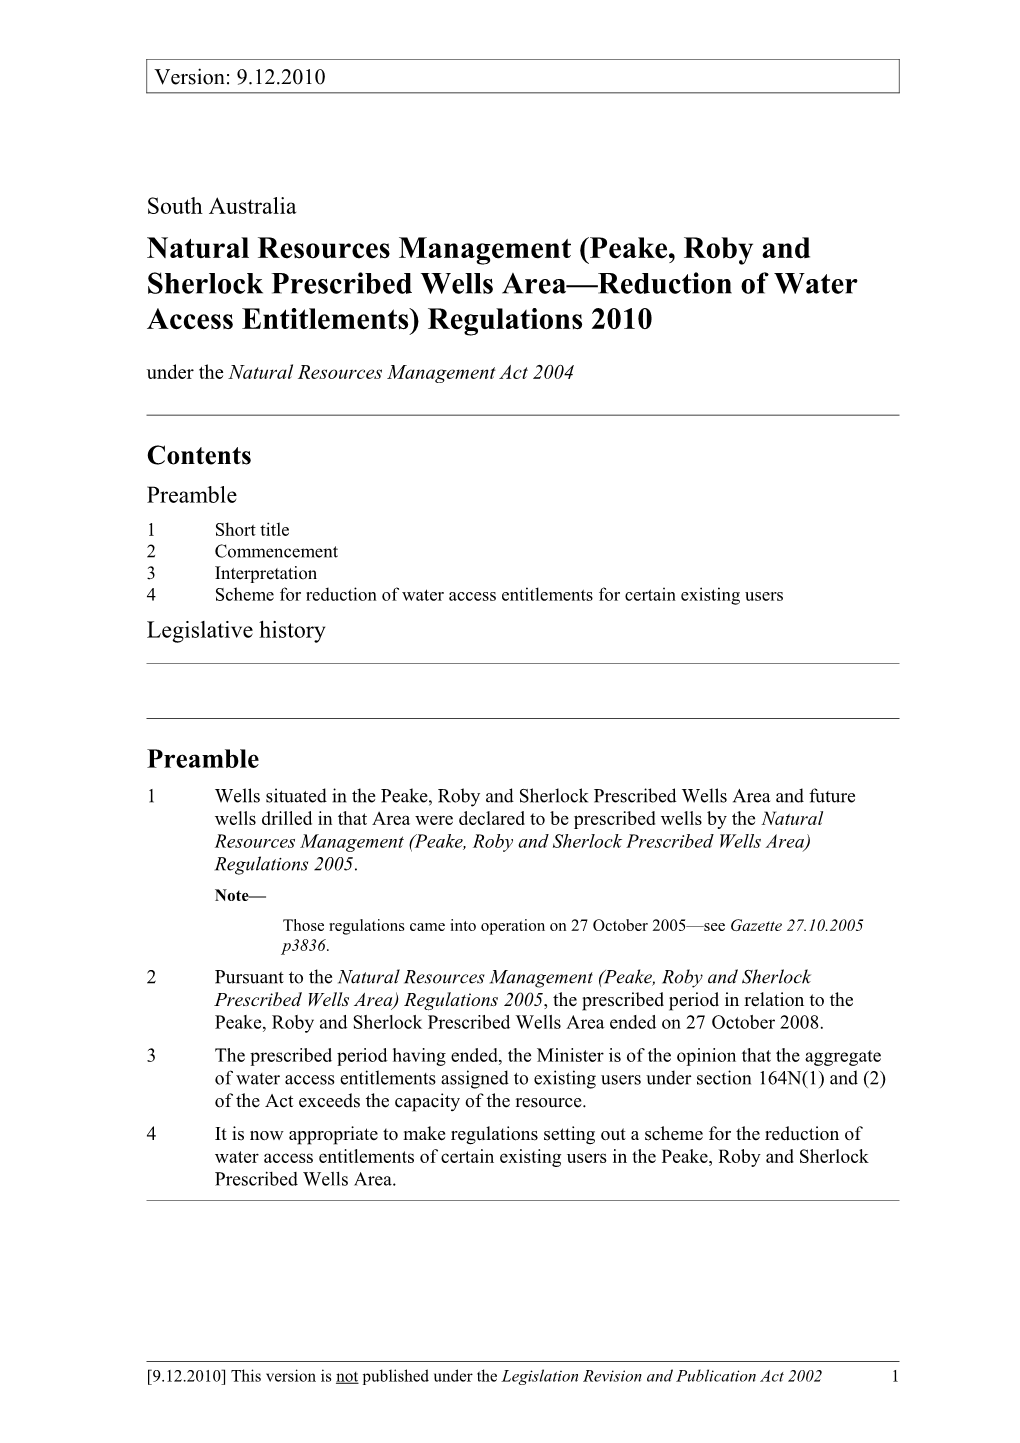 Natural Resources Management (Peake, Roby and Sherlock Prescribedwells Area Reduction Of